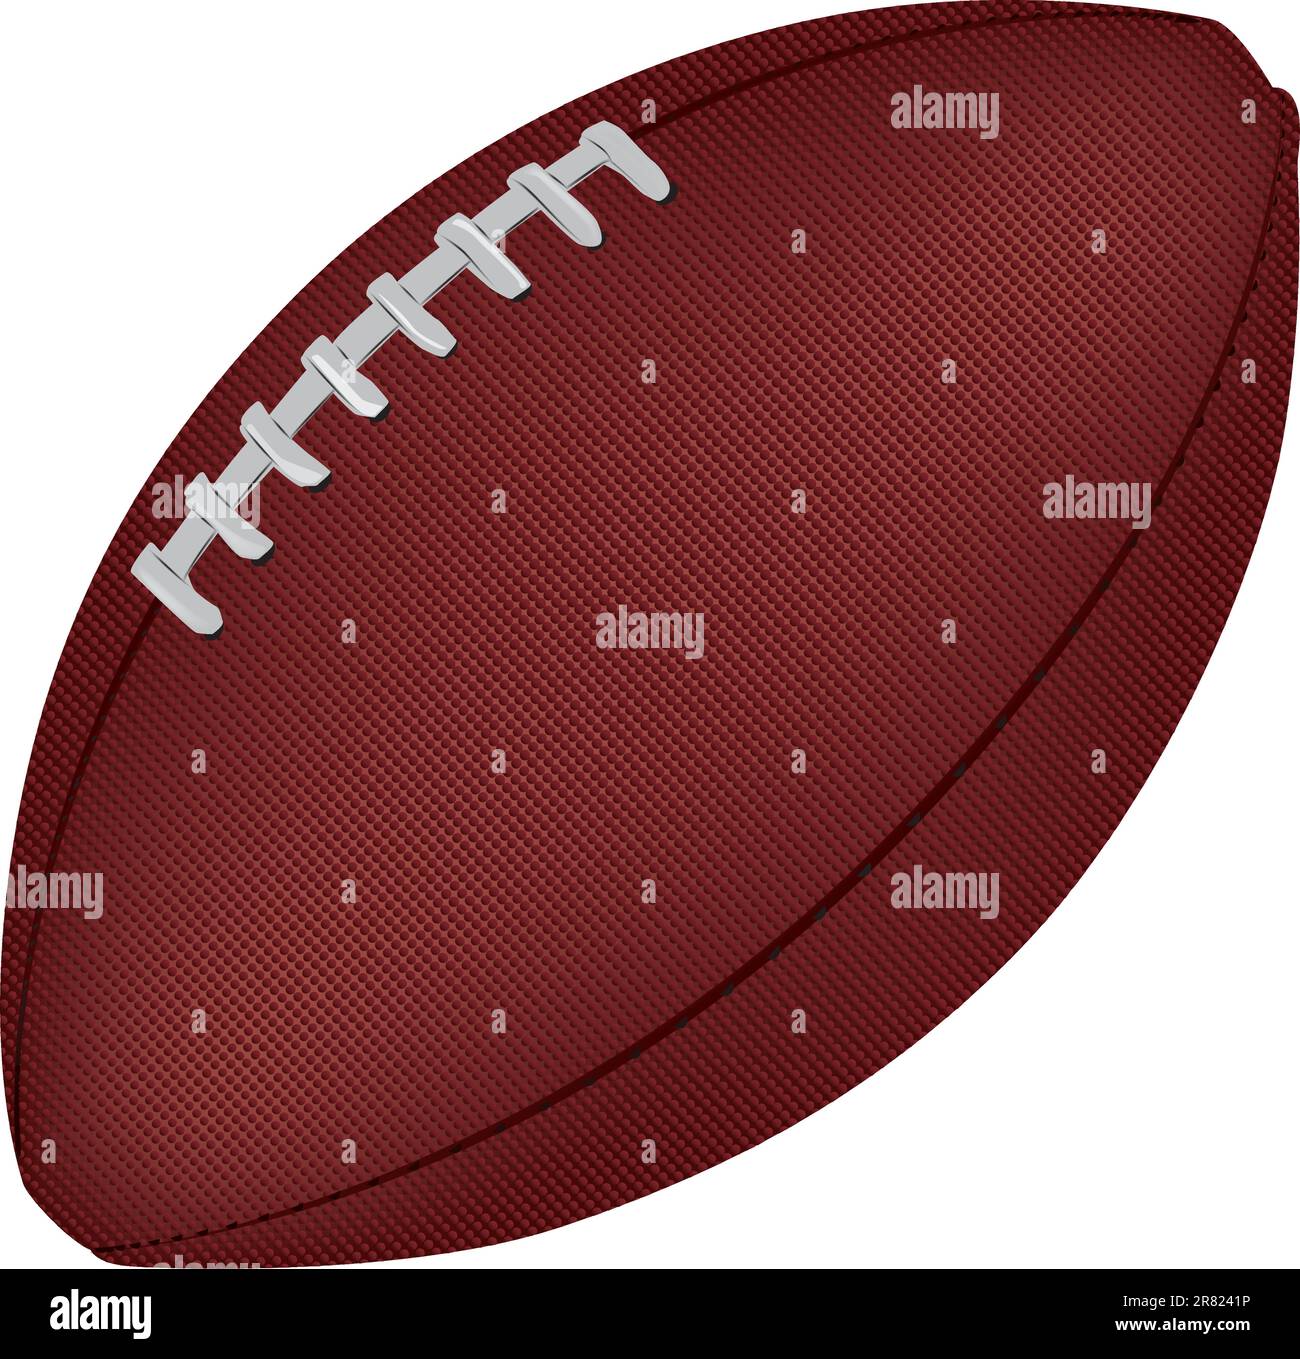 Illustration/Image of a football Stock Vector